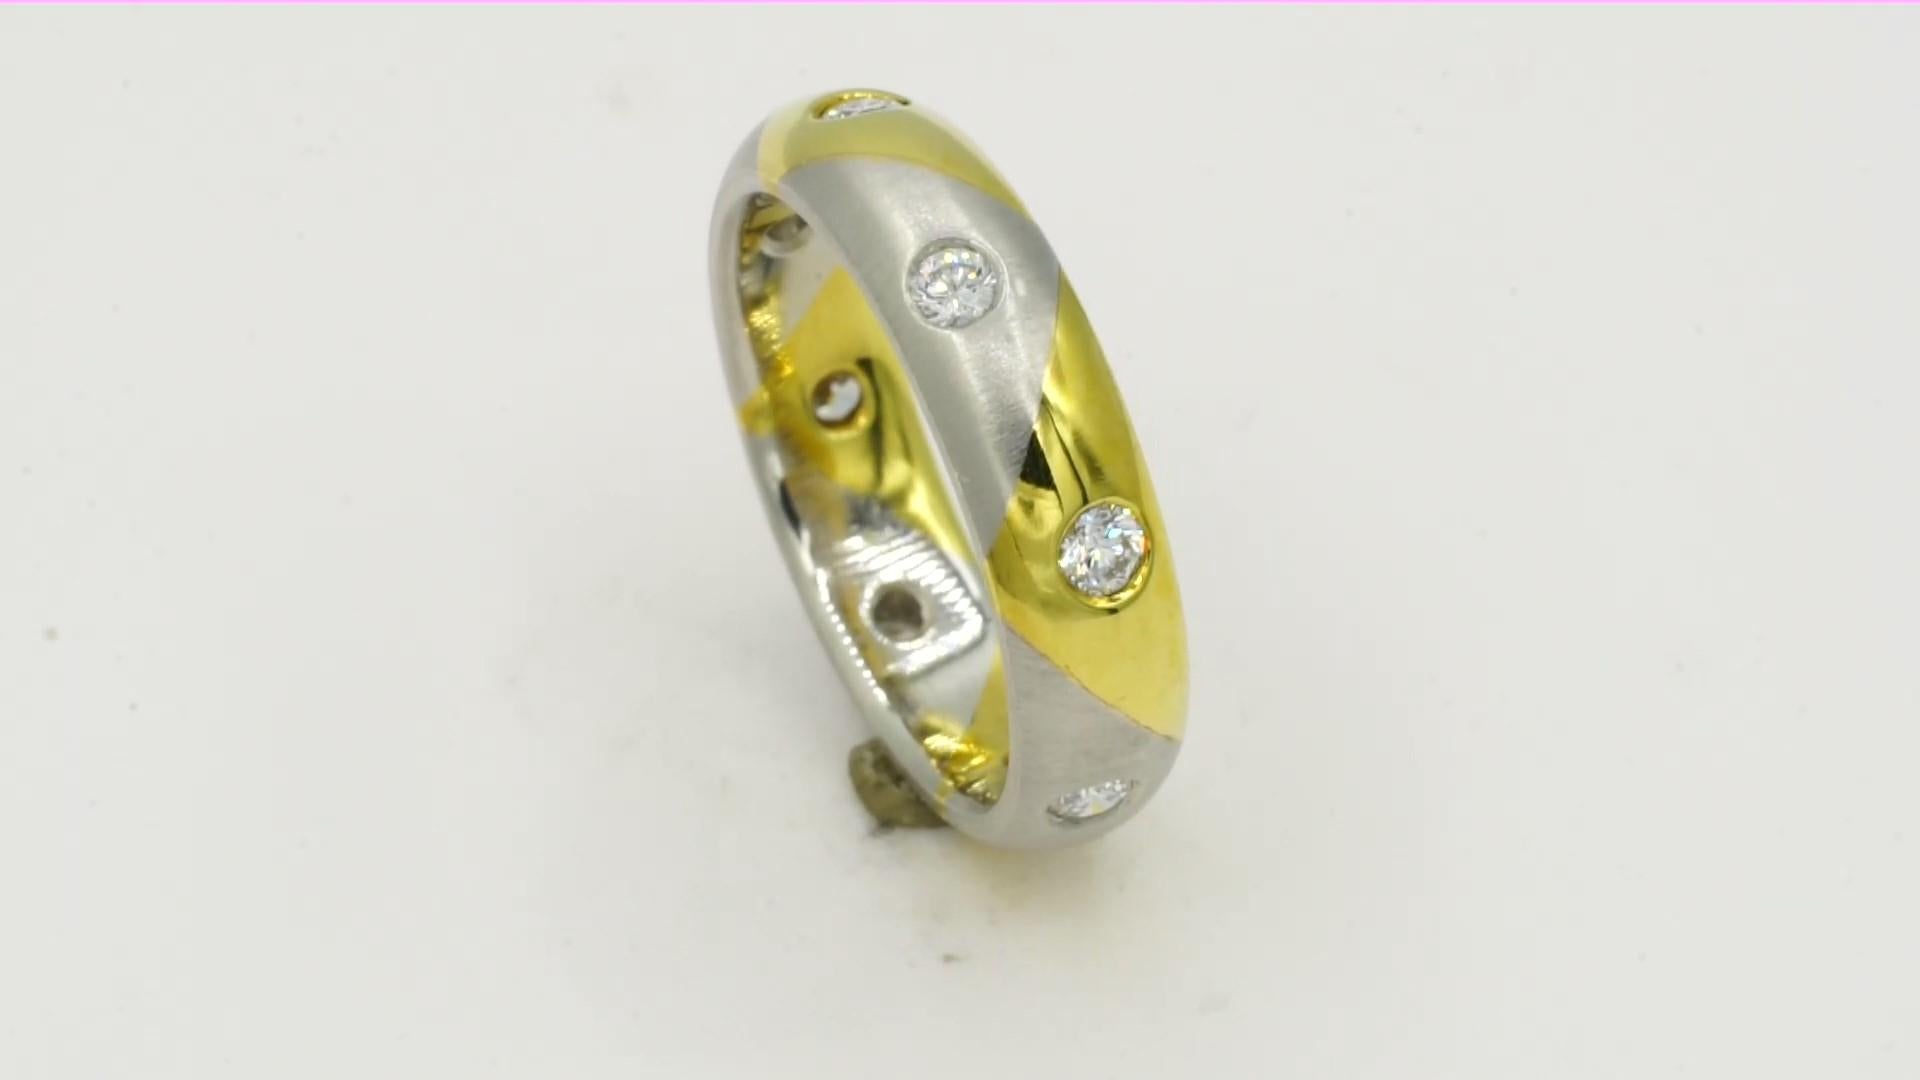  NEW Platinum and 18kt yellow gold flush set round brilliant diamond eternity band of 5 mm wide. Size 6 1/2. The band has alternating sections of polished 18kt yellow gold and satin finish platinum with eight round brilliant diamonds of .44cttw,